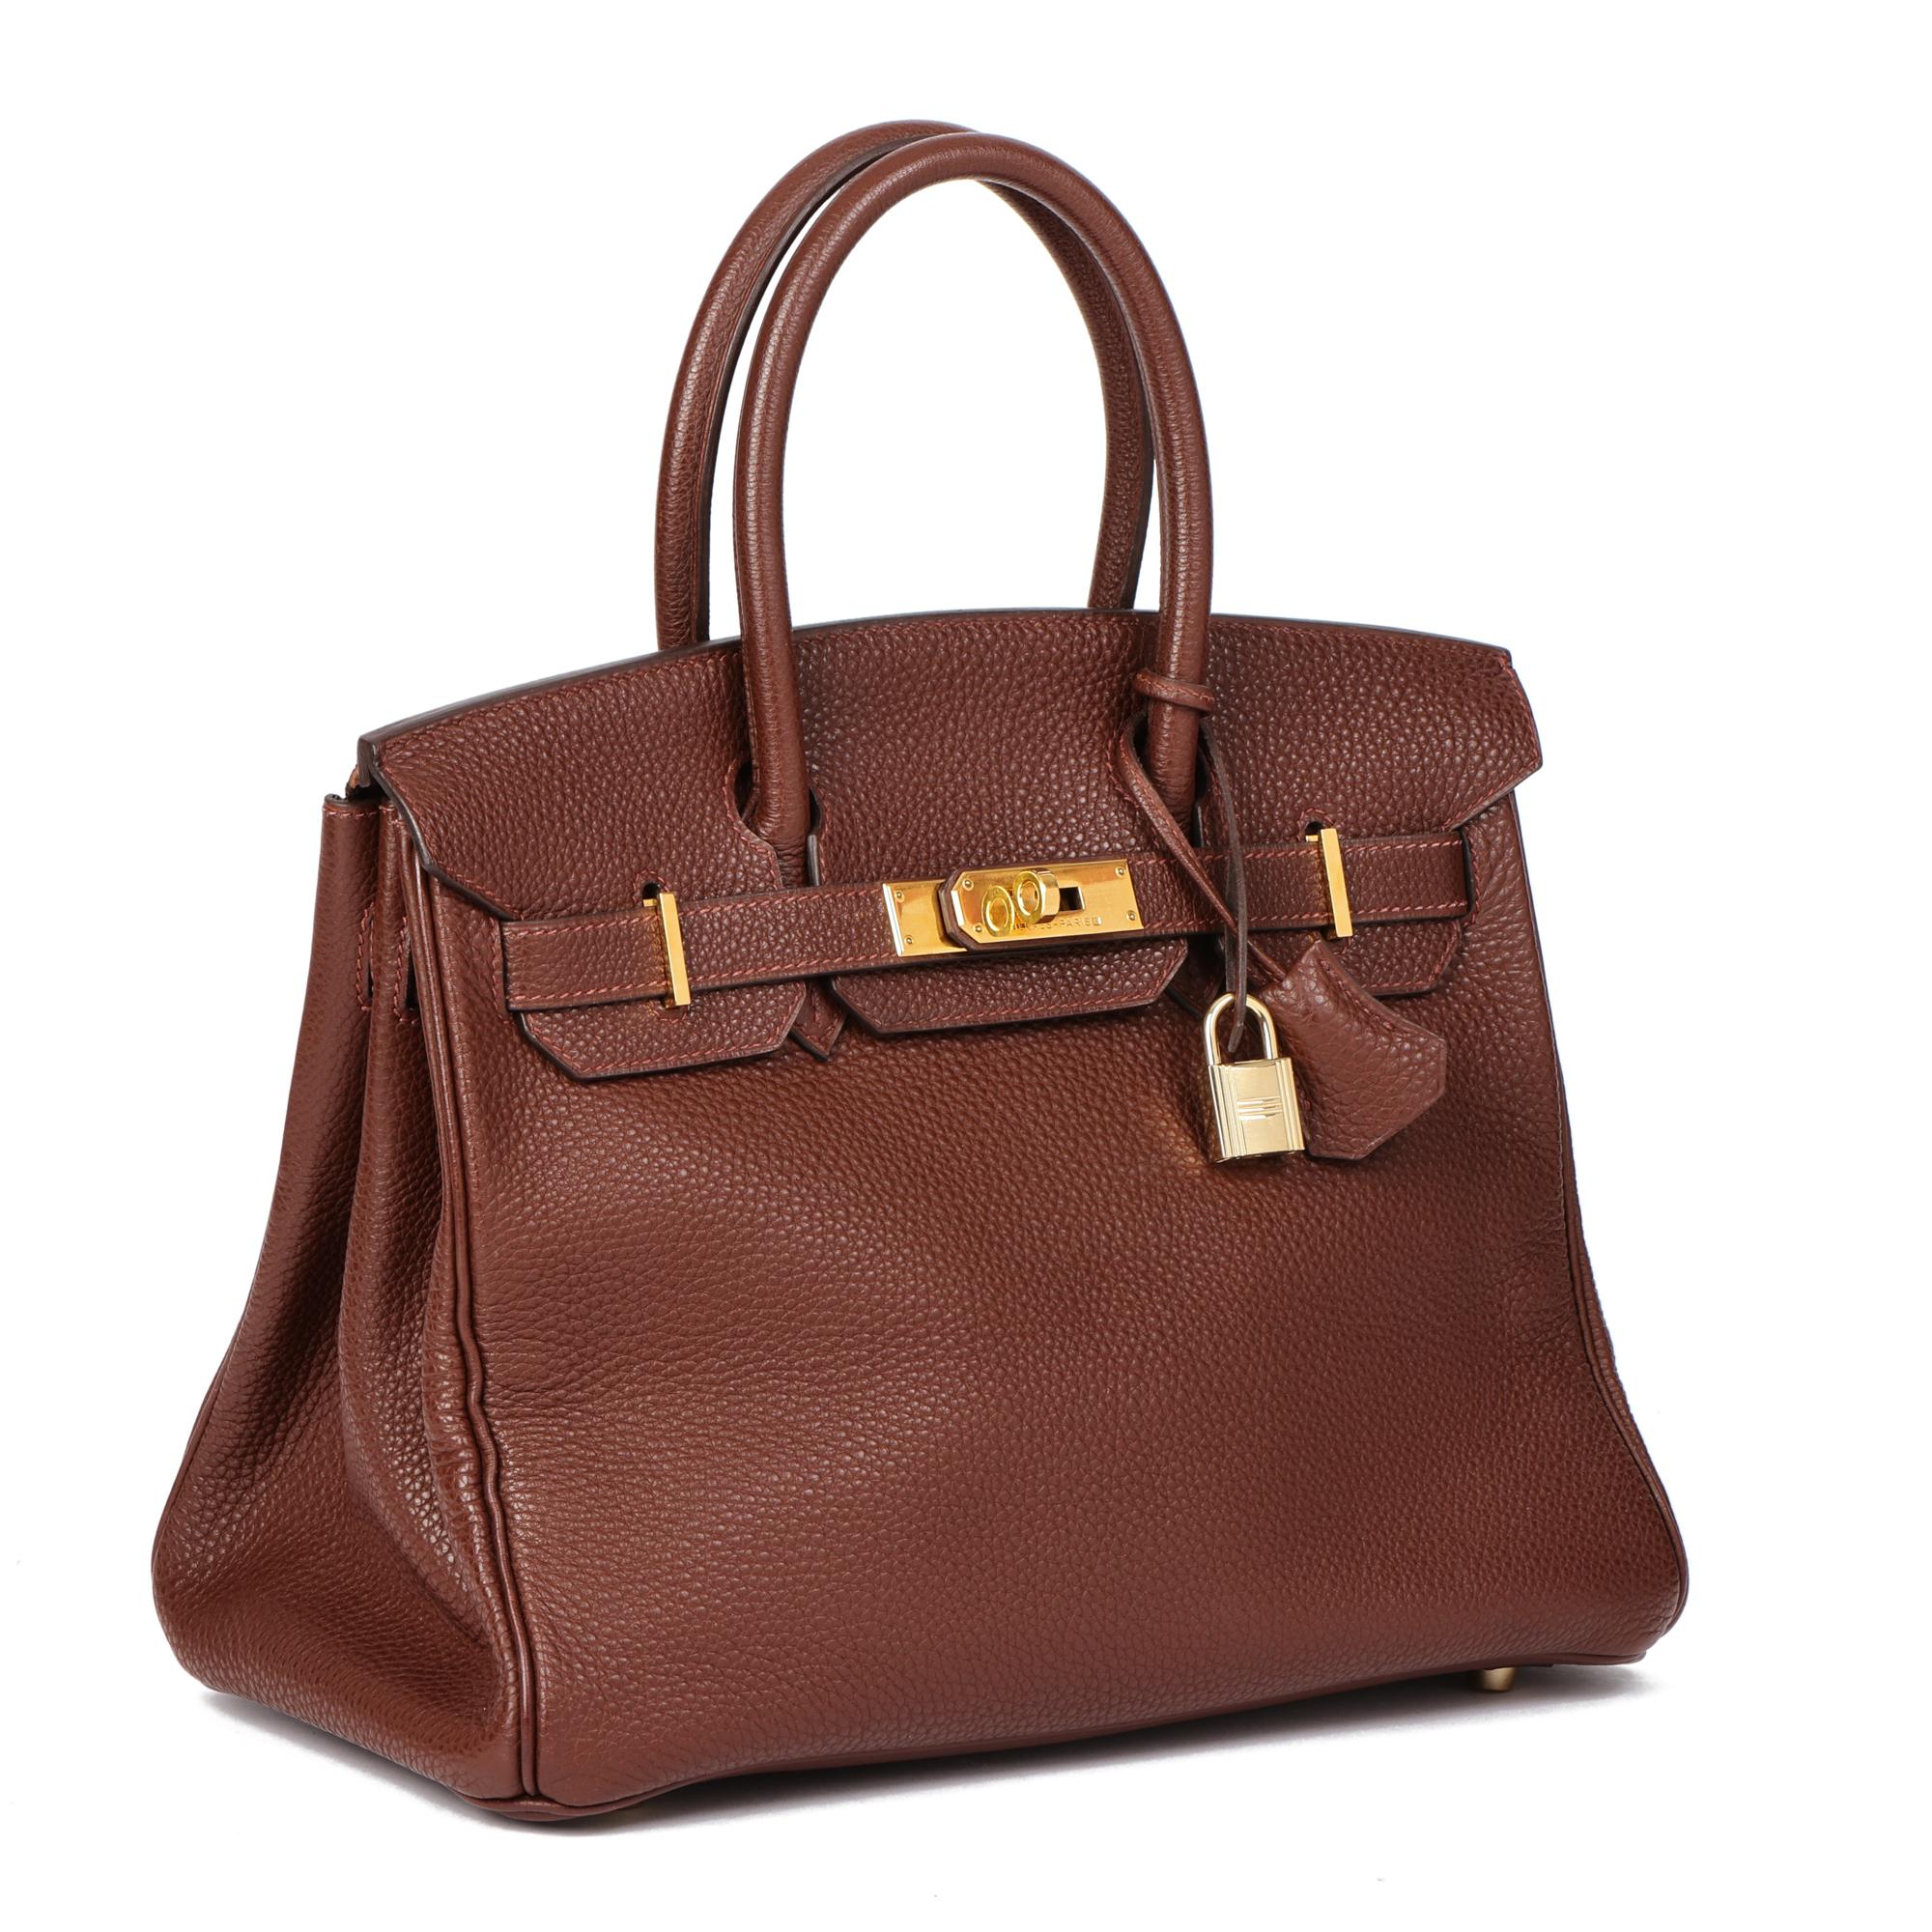 Hermès BROWN TOGO LEATHER VINTAGE BIRKIN 30CM

CONDITION NOTES
The exterior is in excellent condition with light signs of use.
The interior is in excellent condition with light signs of use.
The hardware is in very good condition with light signs of